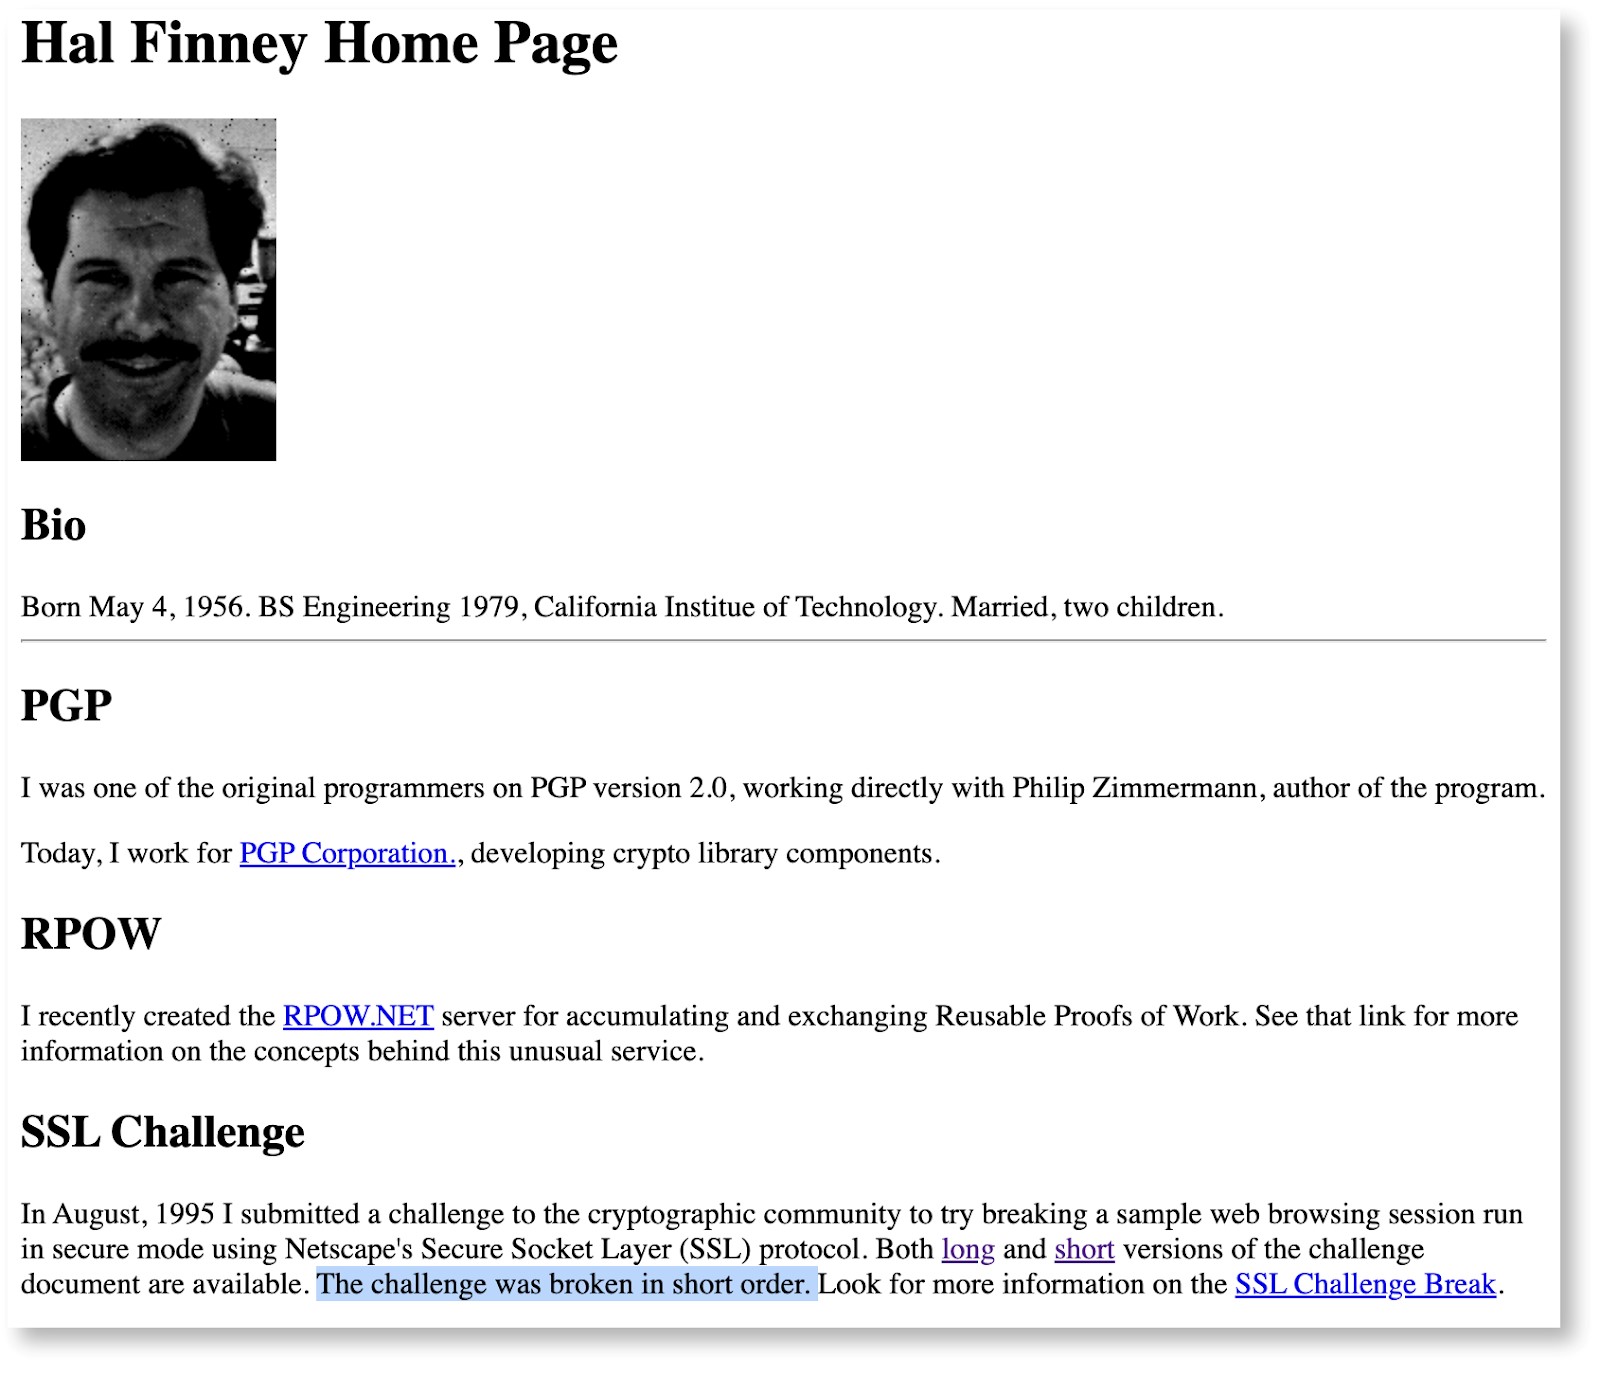 Hal Finney Home Page